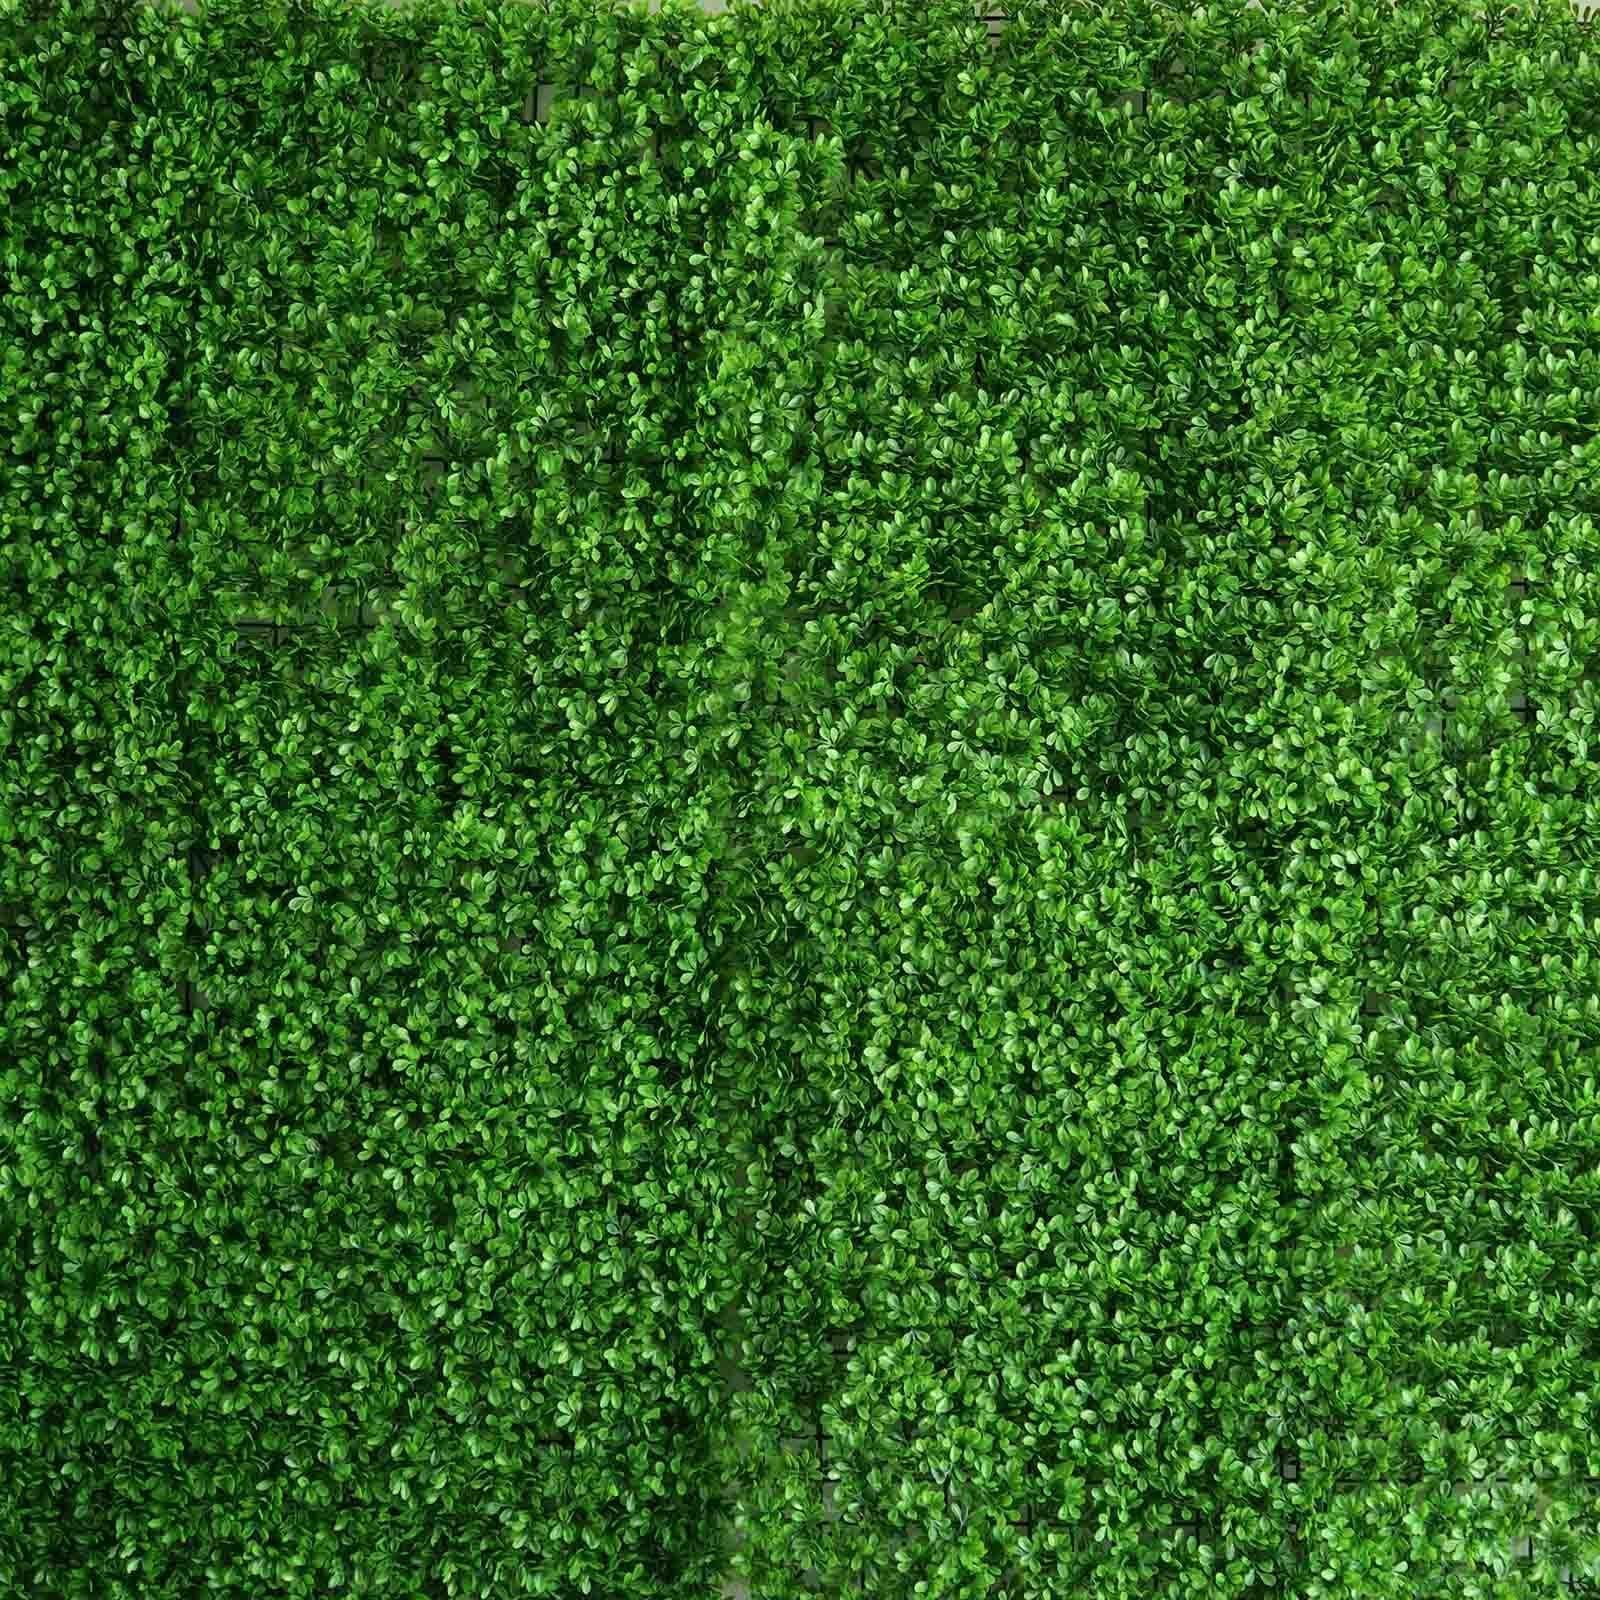 4 pcs Artificial Grass Foliage UV Protected Wall Backdrop Panels 11 sq ft - Lime Green ARTI_5062_GRN_09